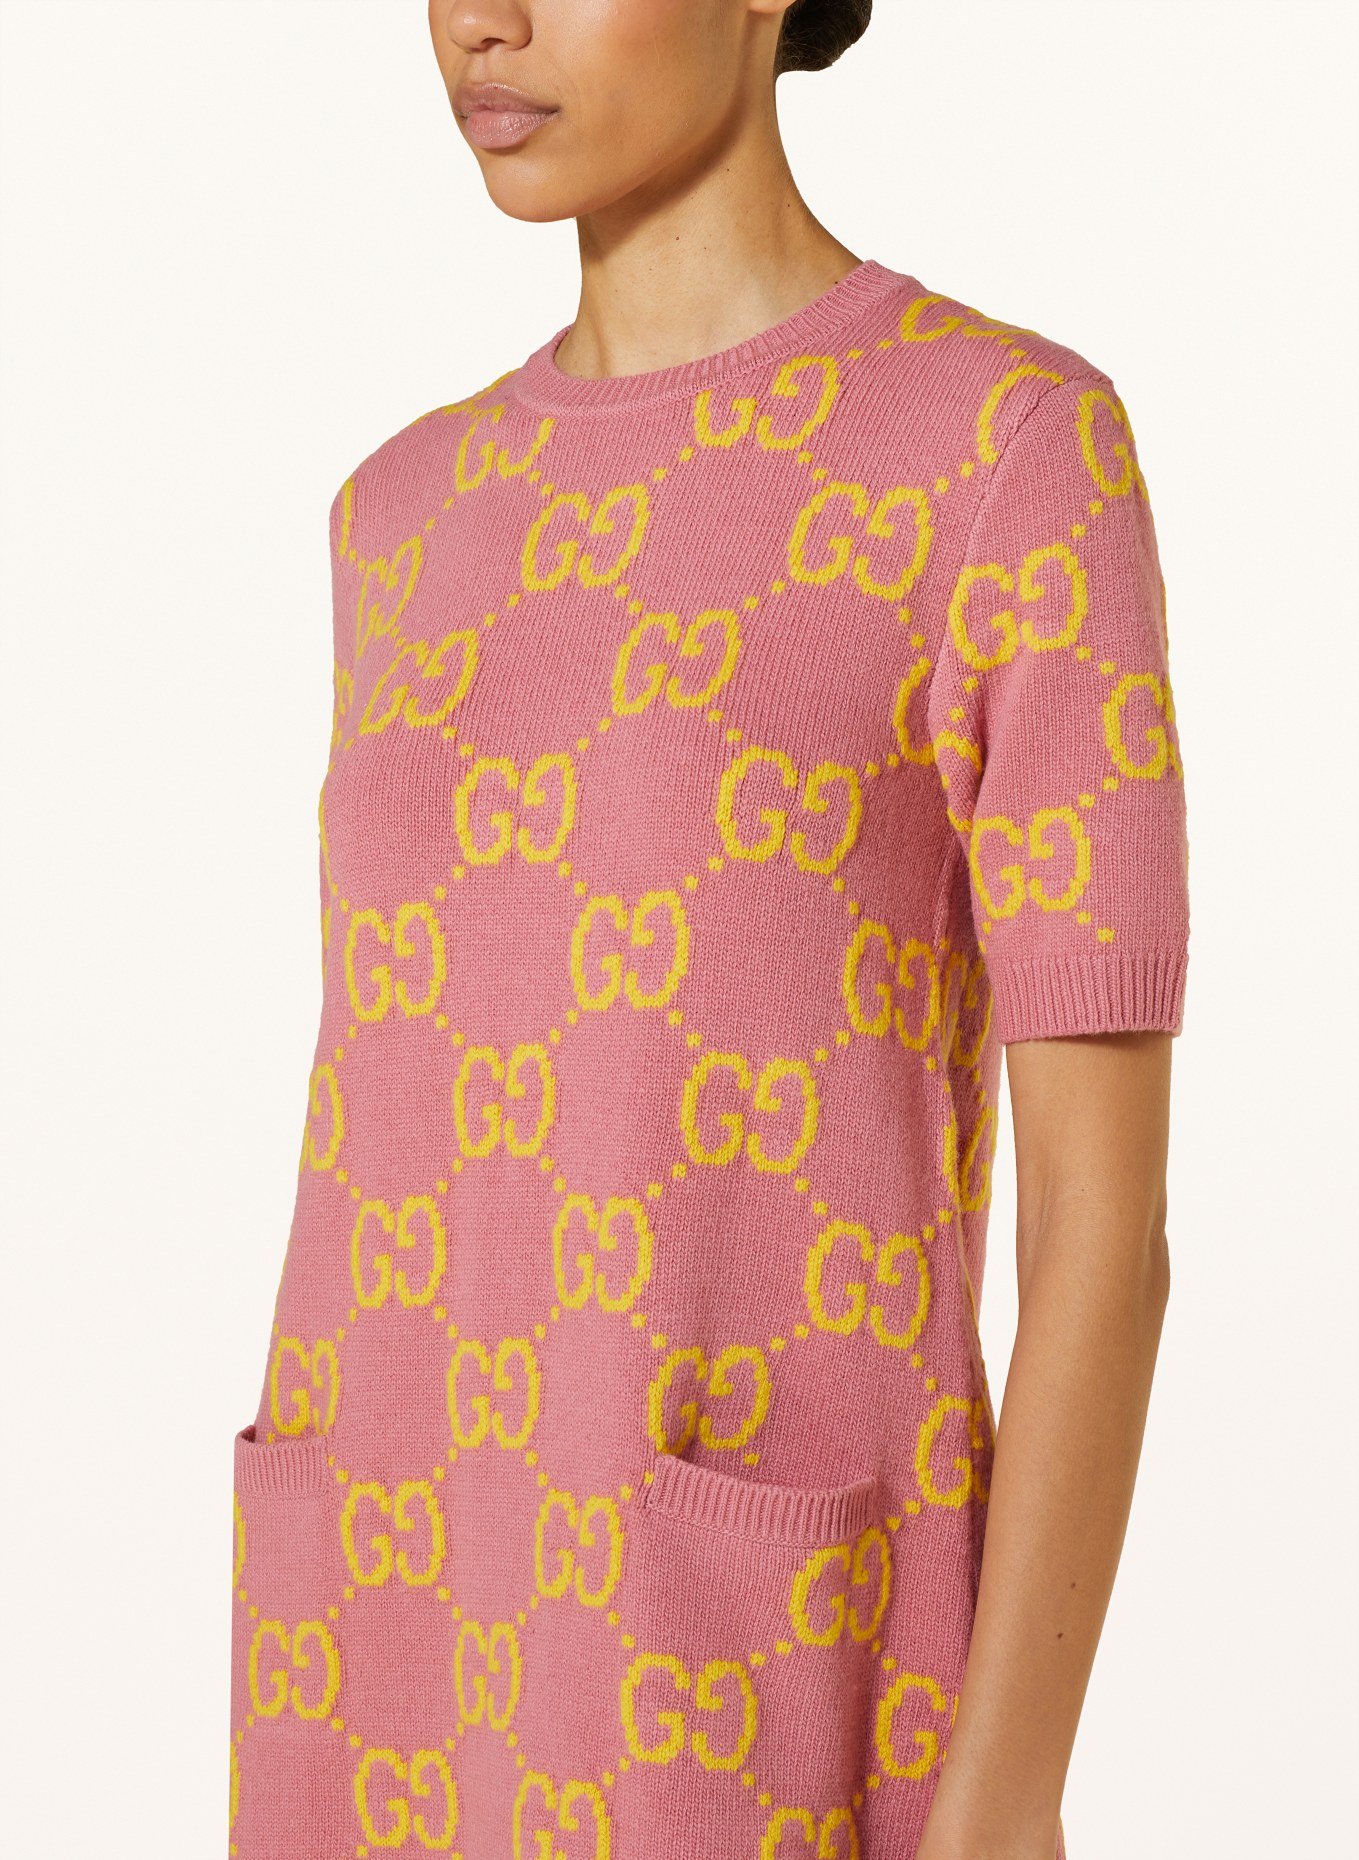 GUCCI Knit dress, Color: PINK/ DARK YELLOW (Image 4)